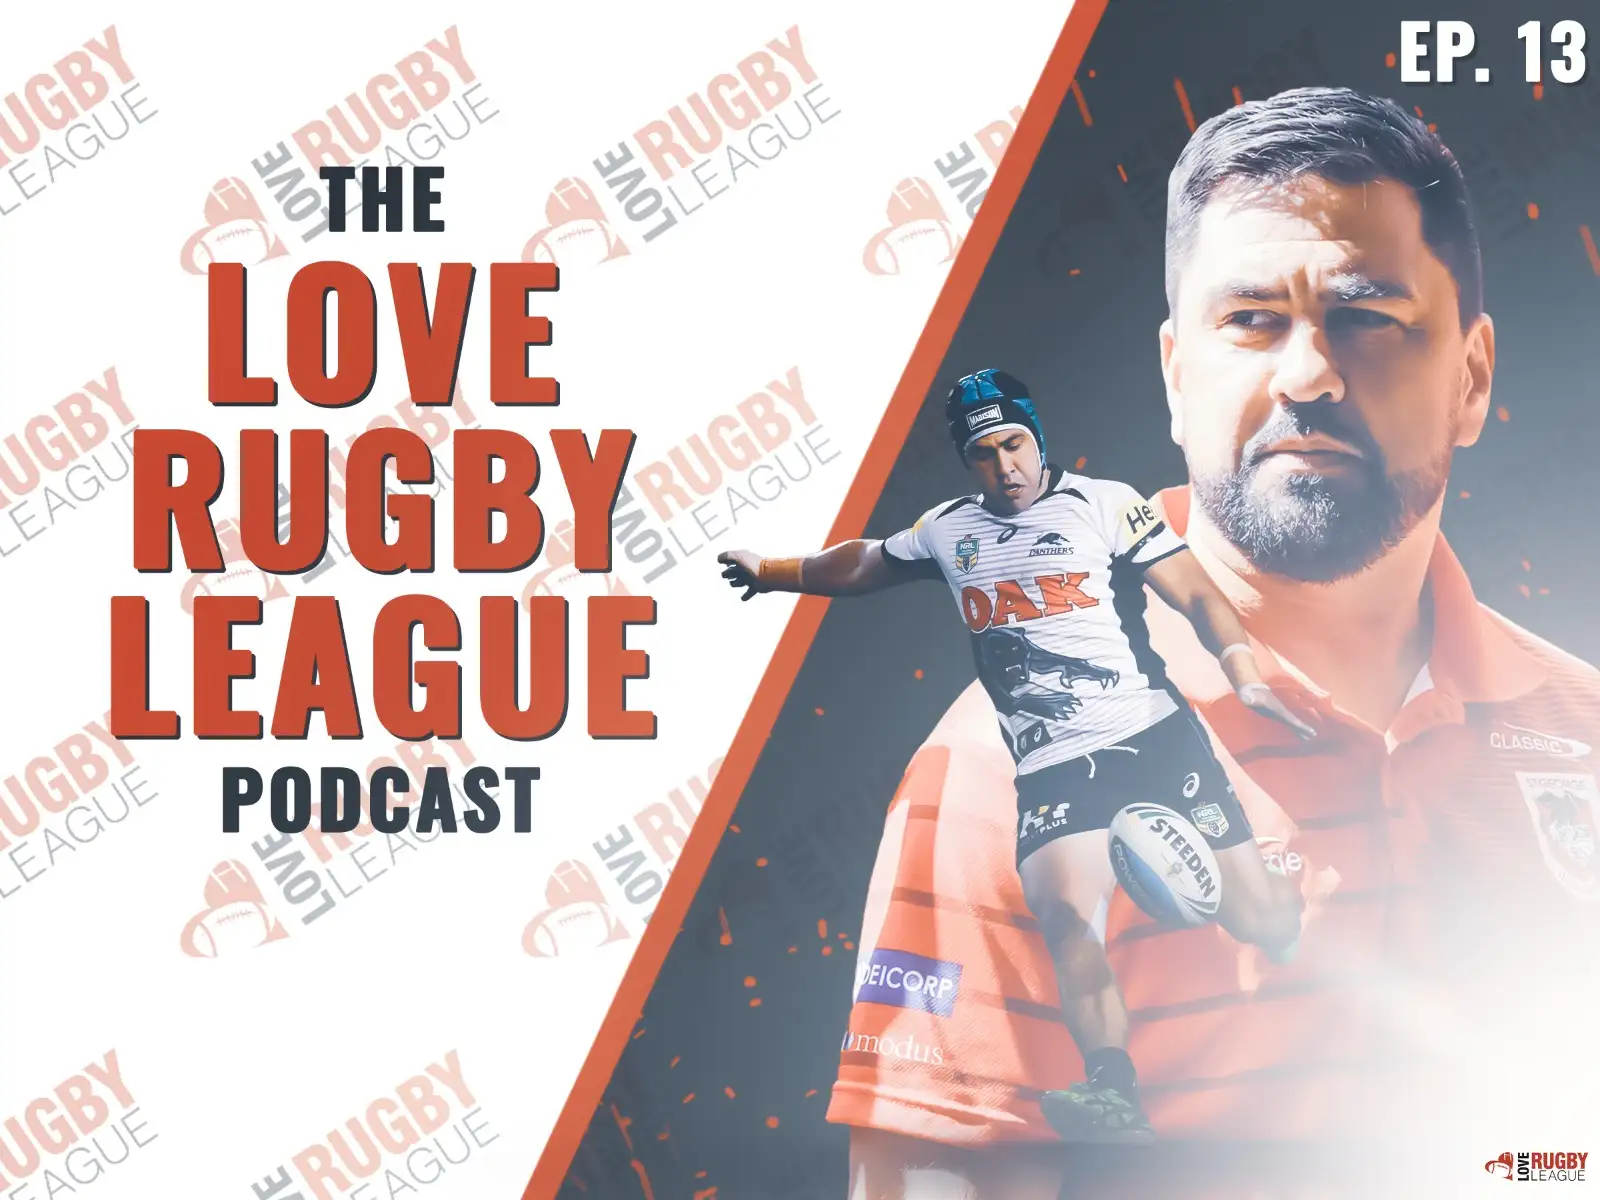 Podcast: Jamie Soward on career, Super League & coaching ambitions